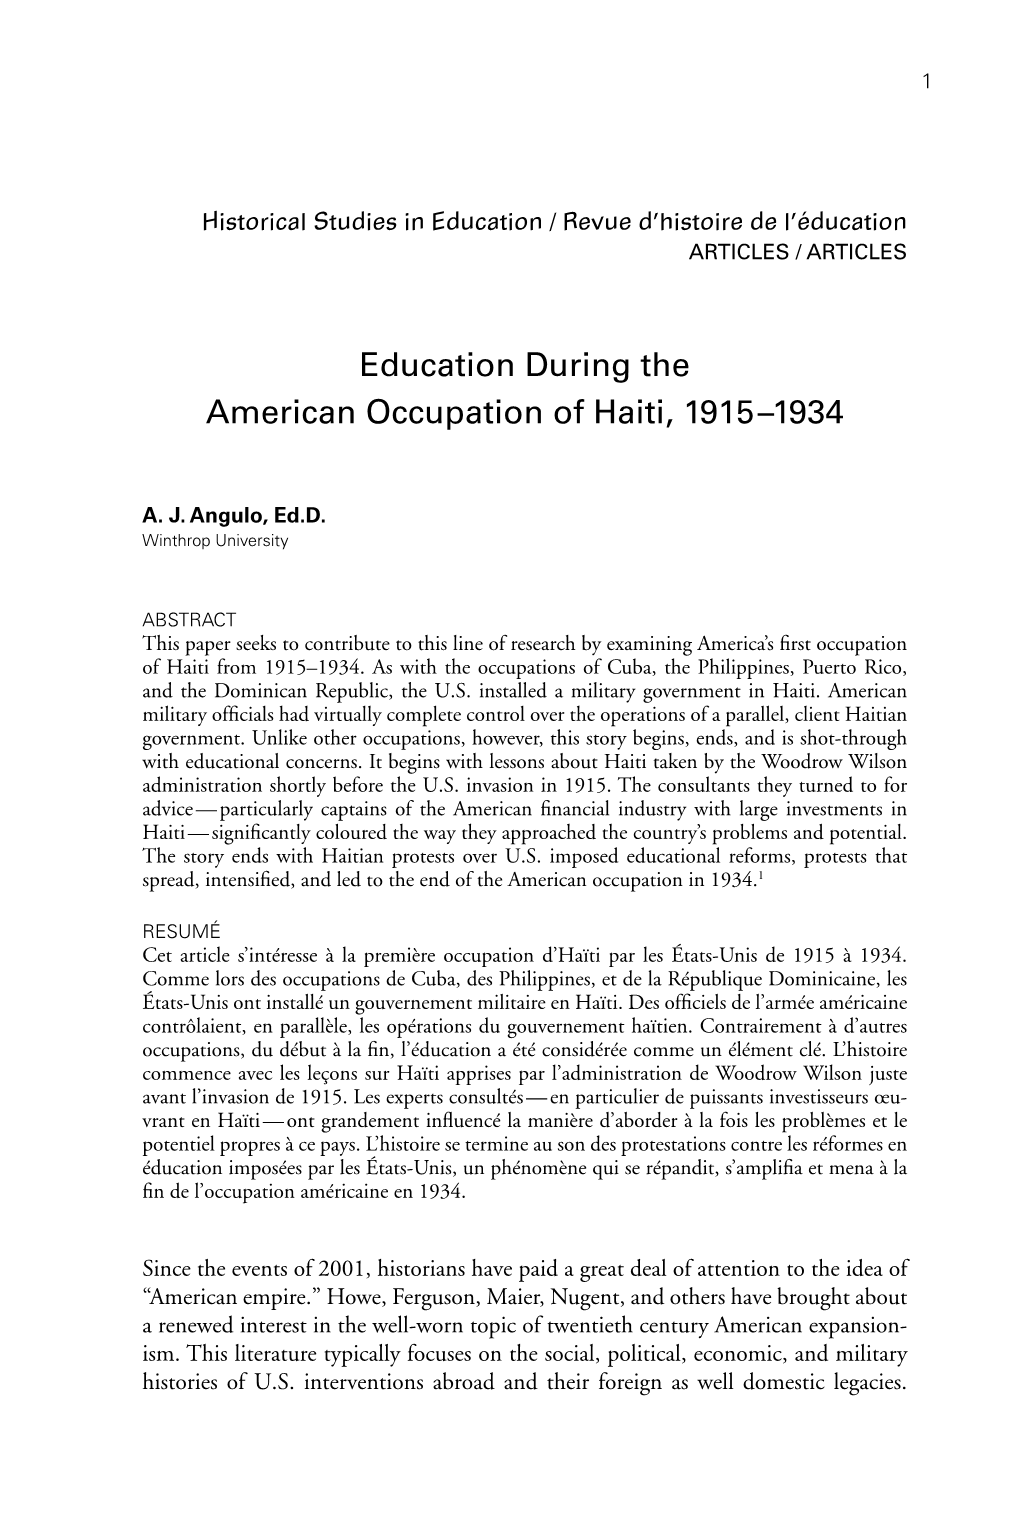 Education During the American Occupation of Haiti, 1915–1934